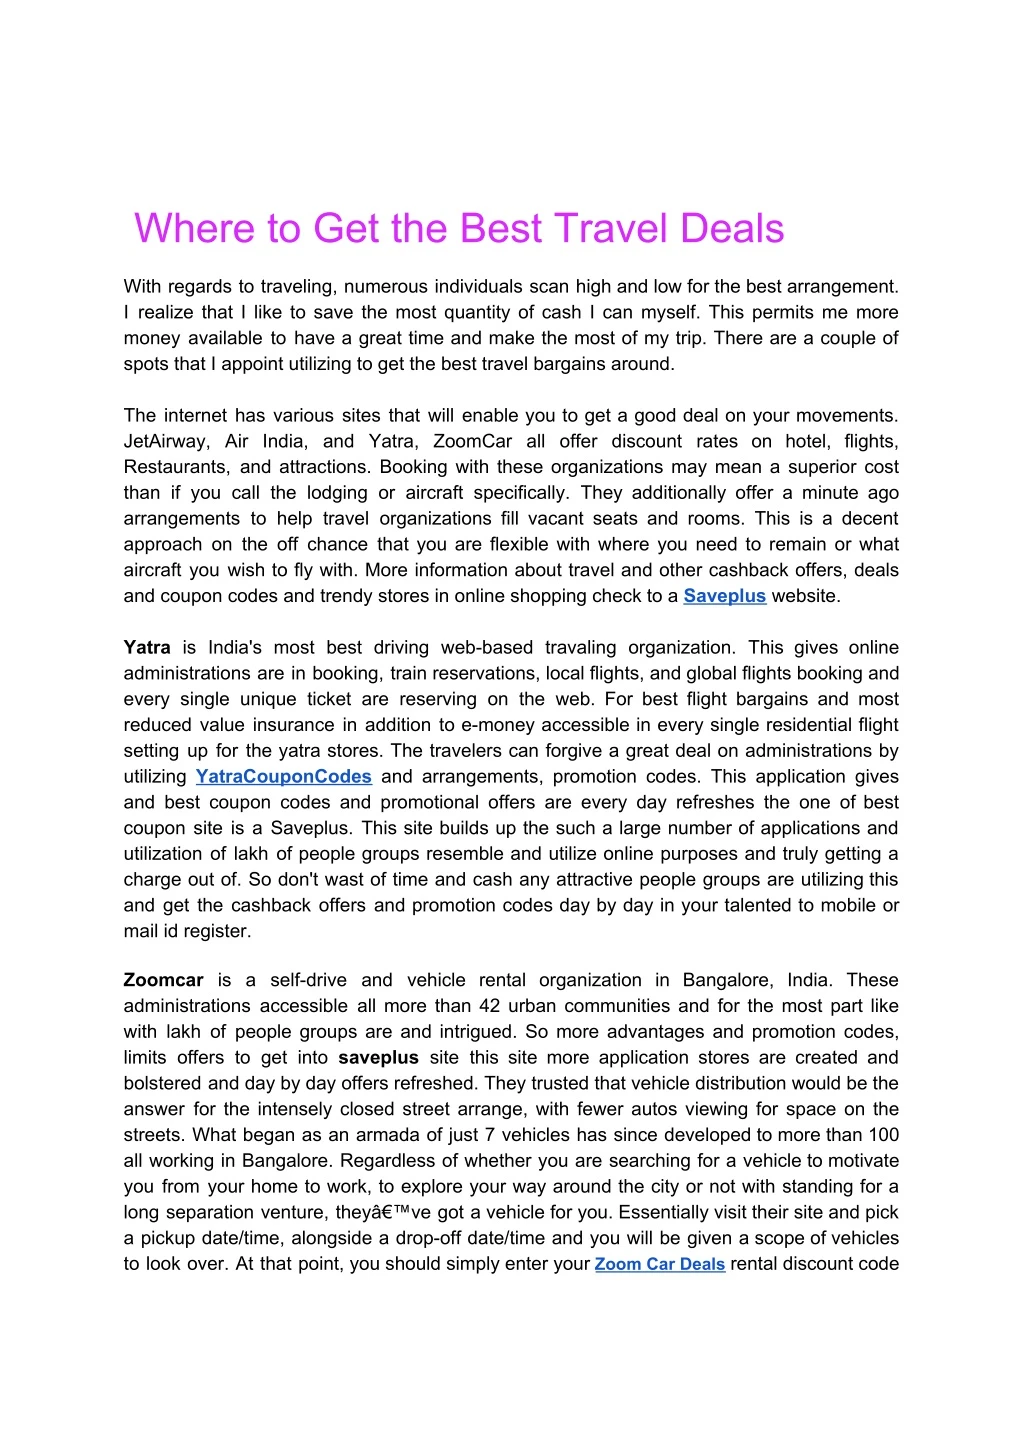 where to get the best travel deals